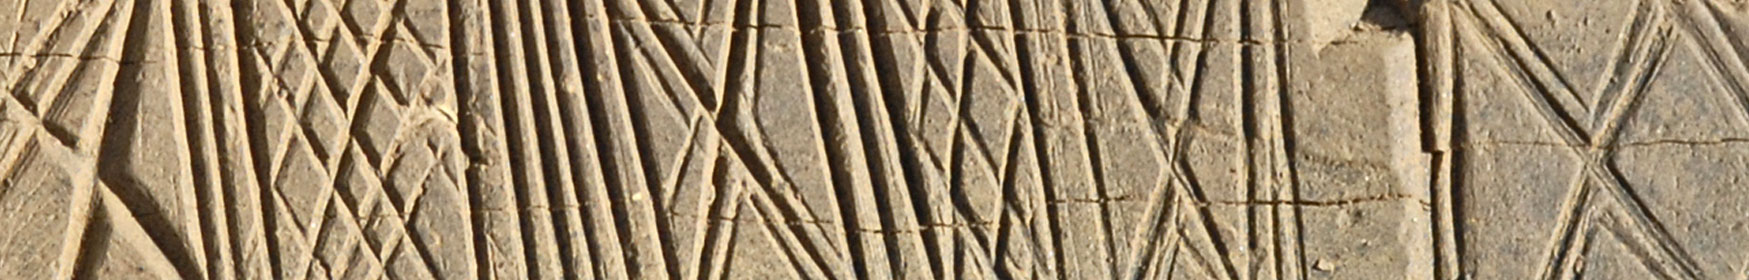 Ness of Brodgar Incised Stone